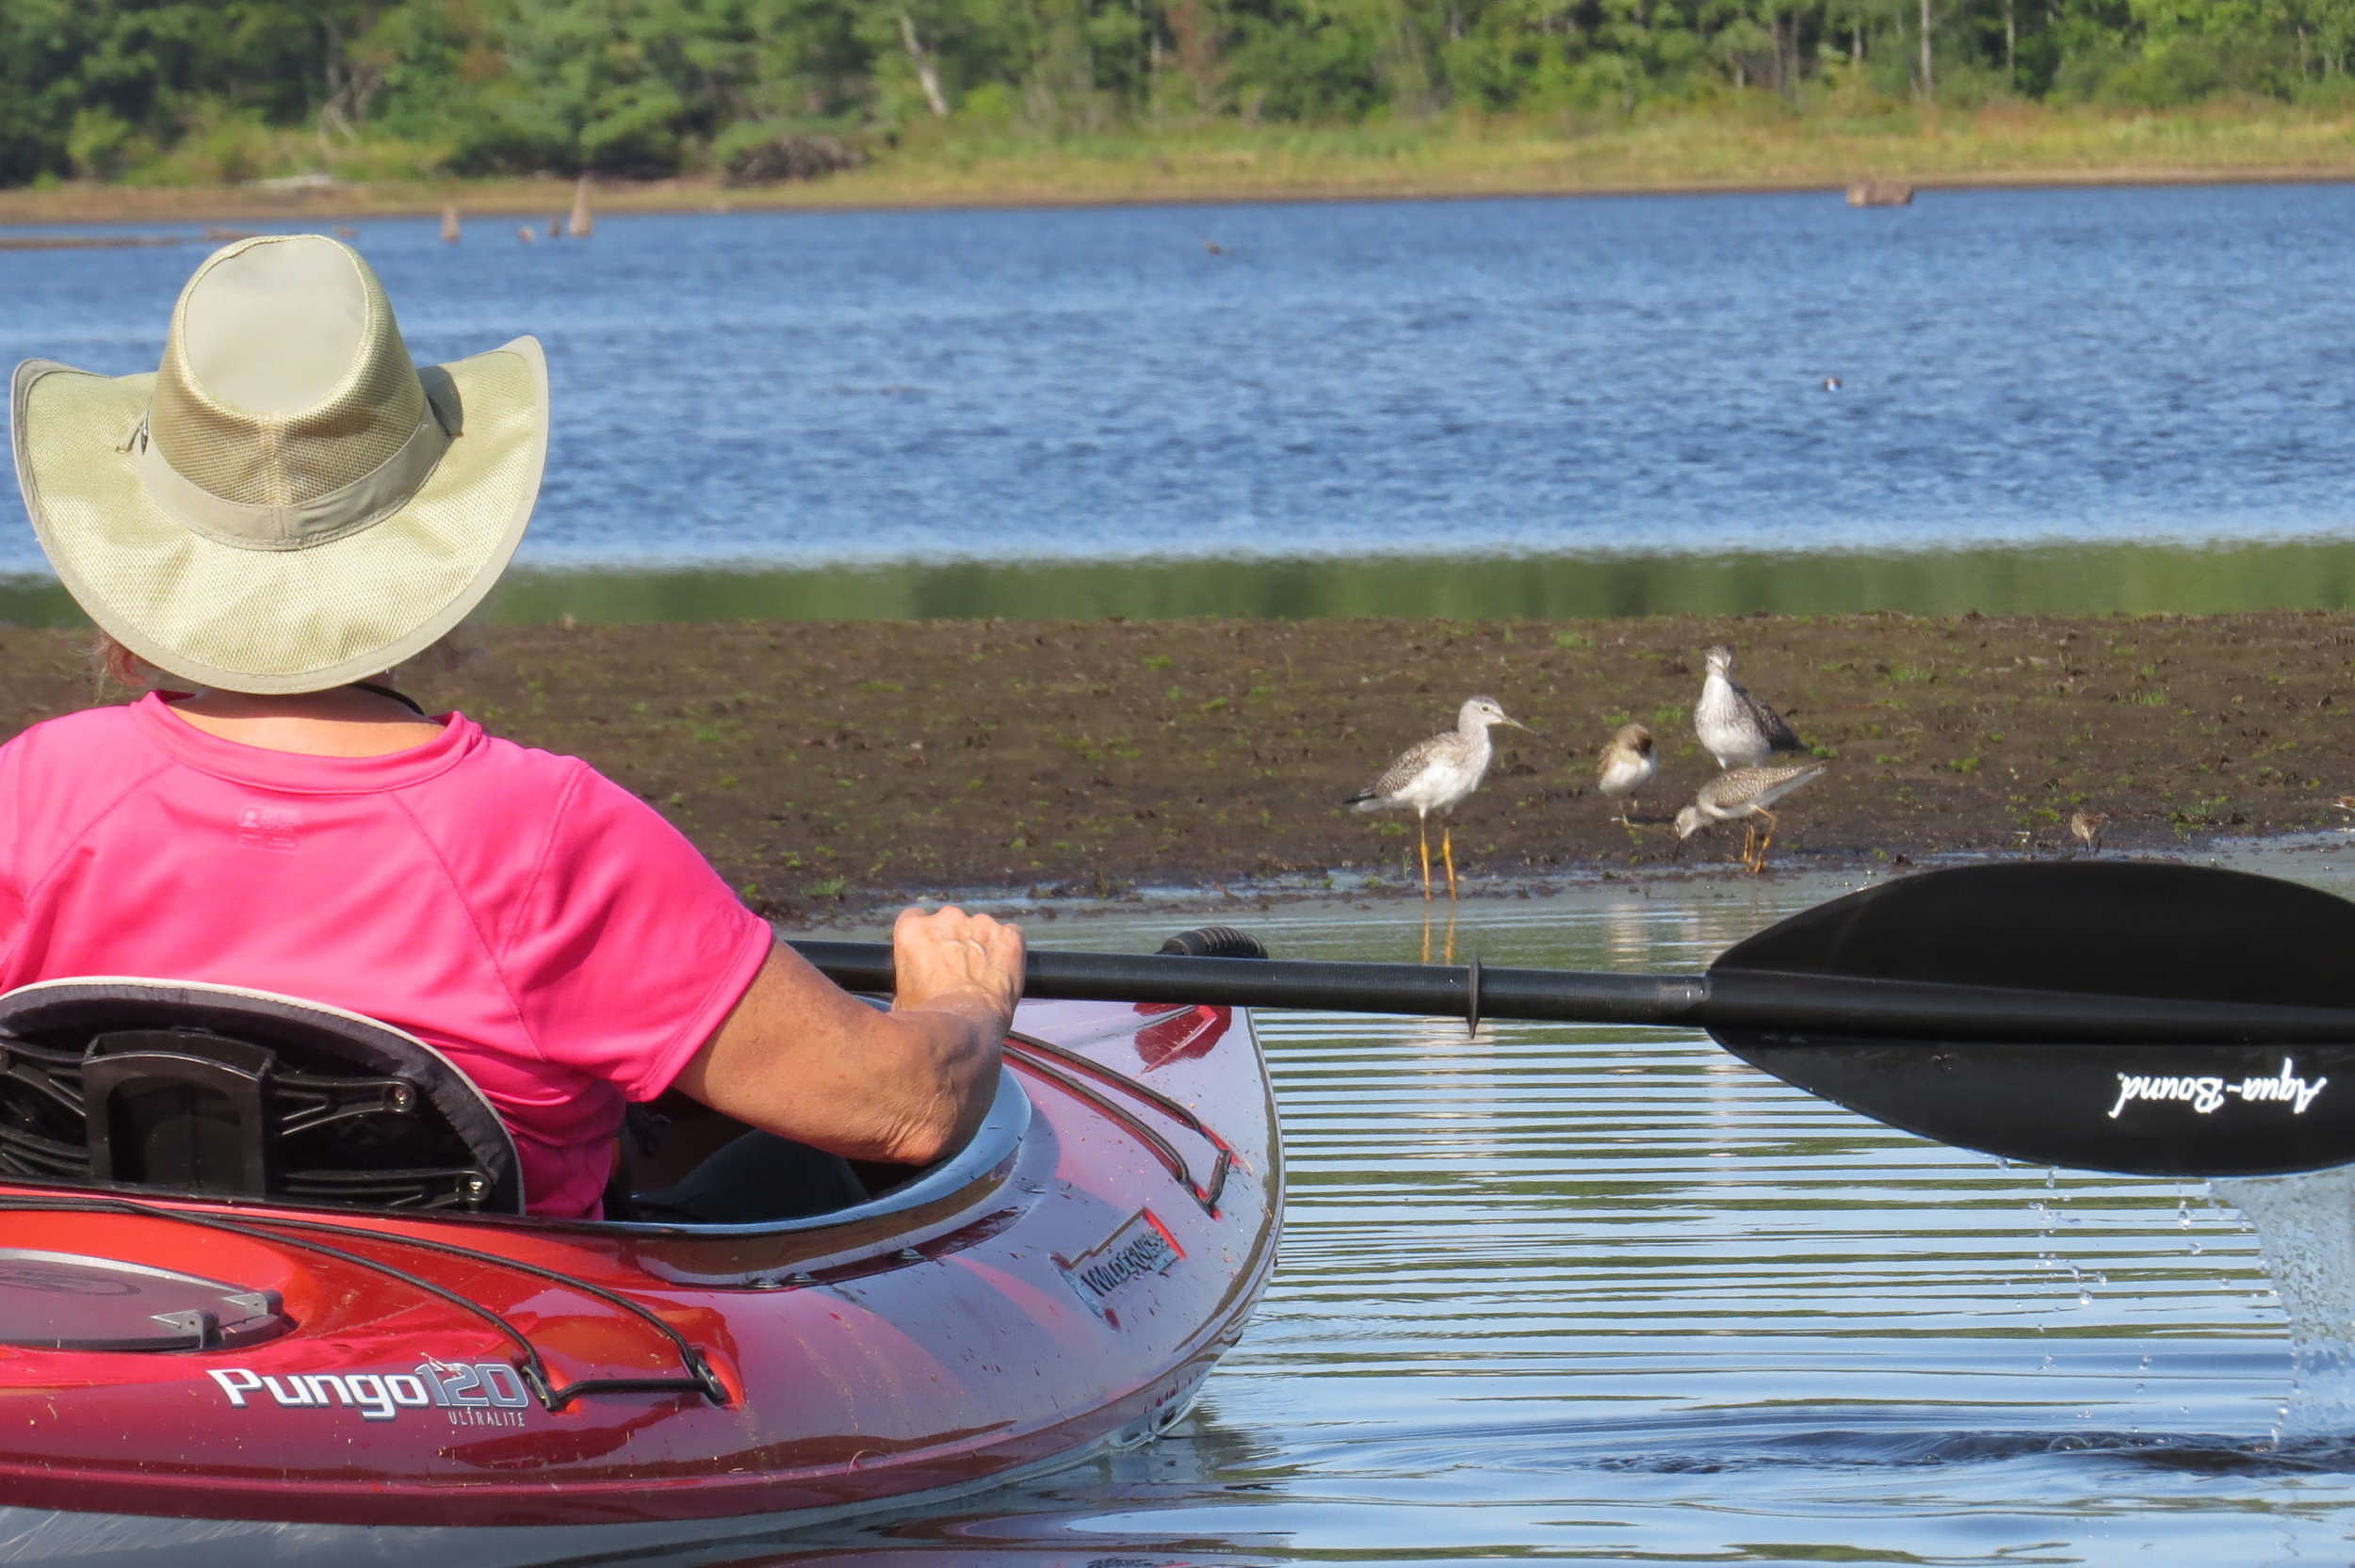 A kayaker observes sandpipers on Powdermill Pond. (photo © Meade Cadot)